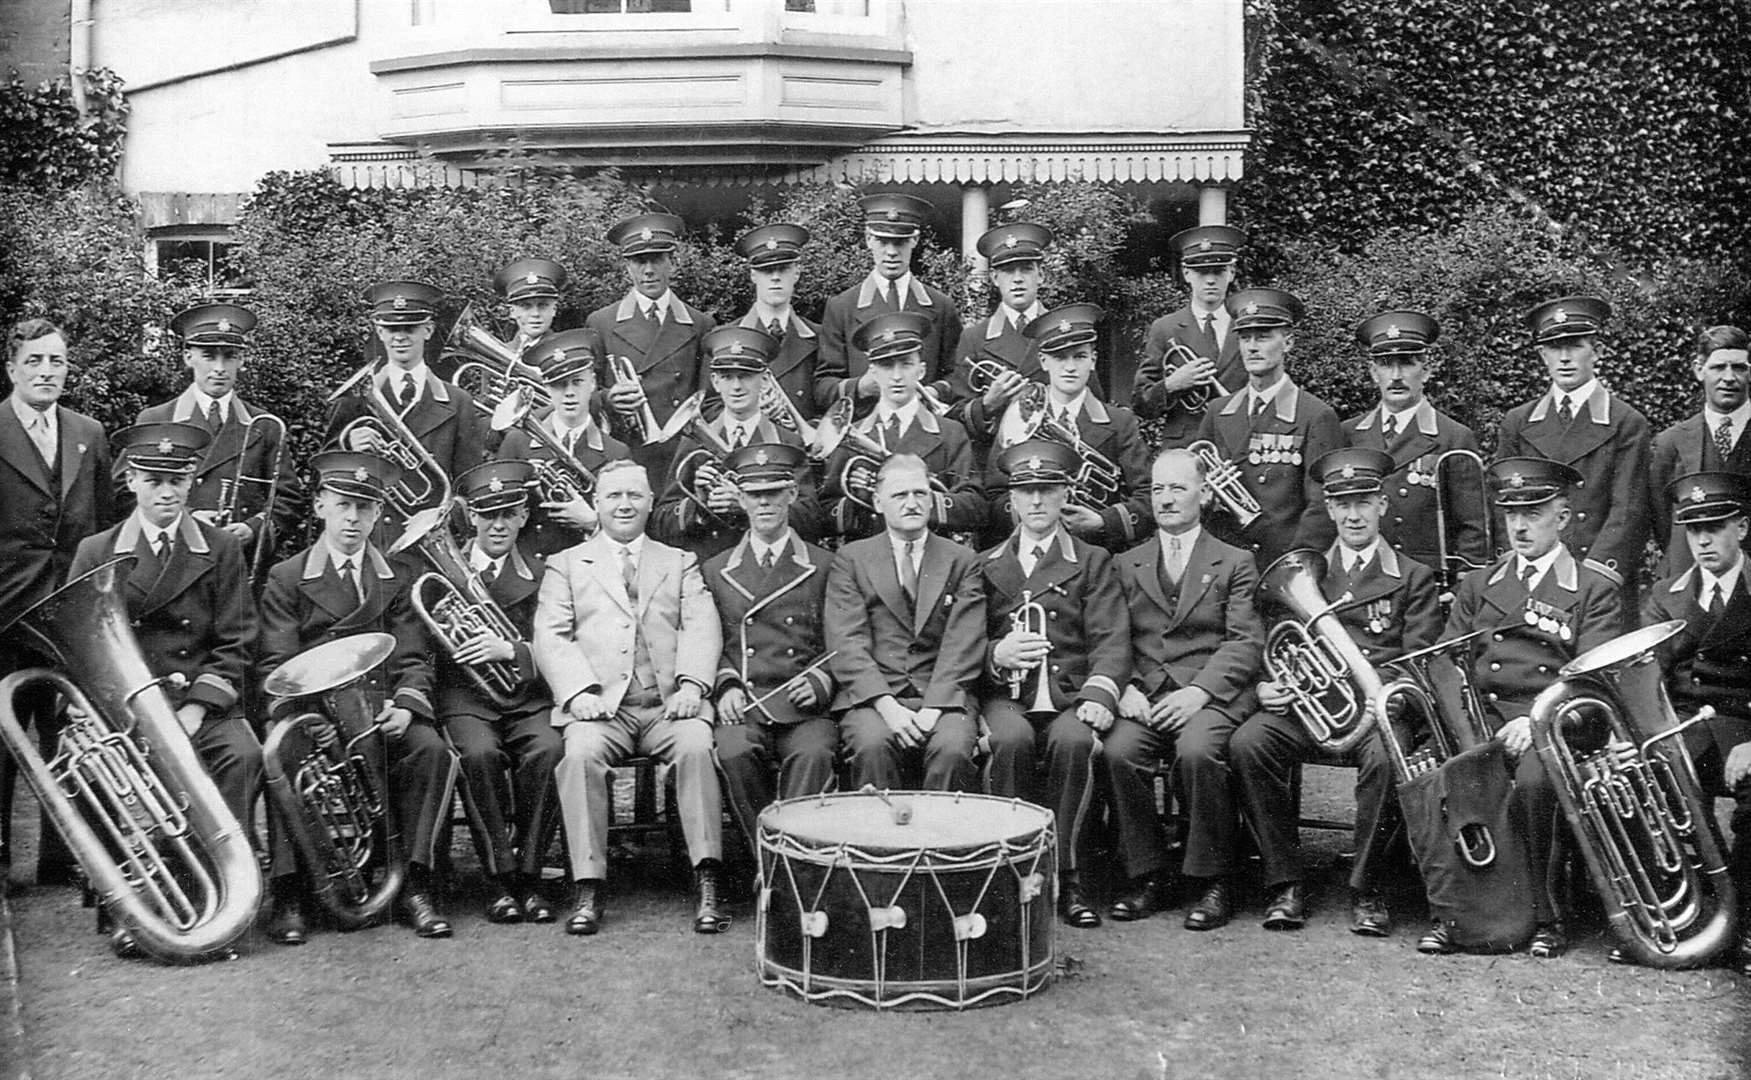 The East Dereham Silver Band